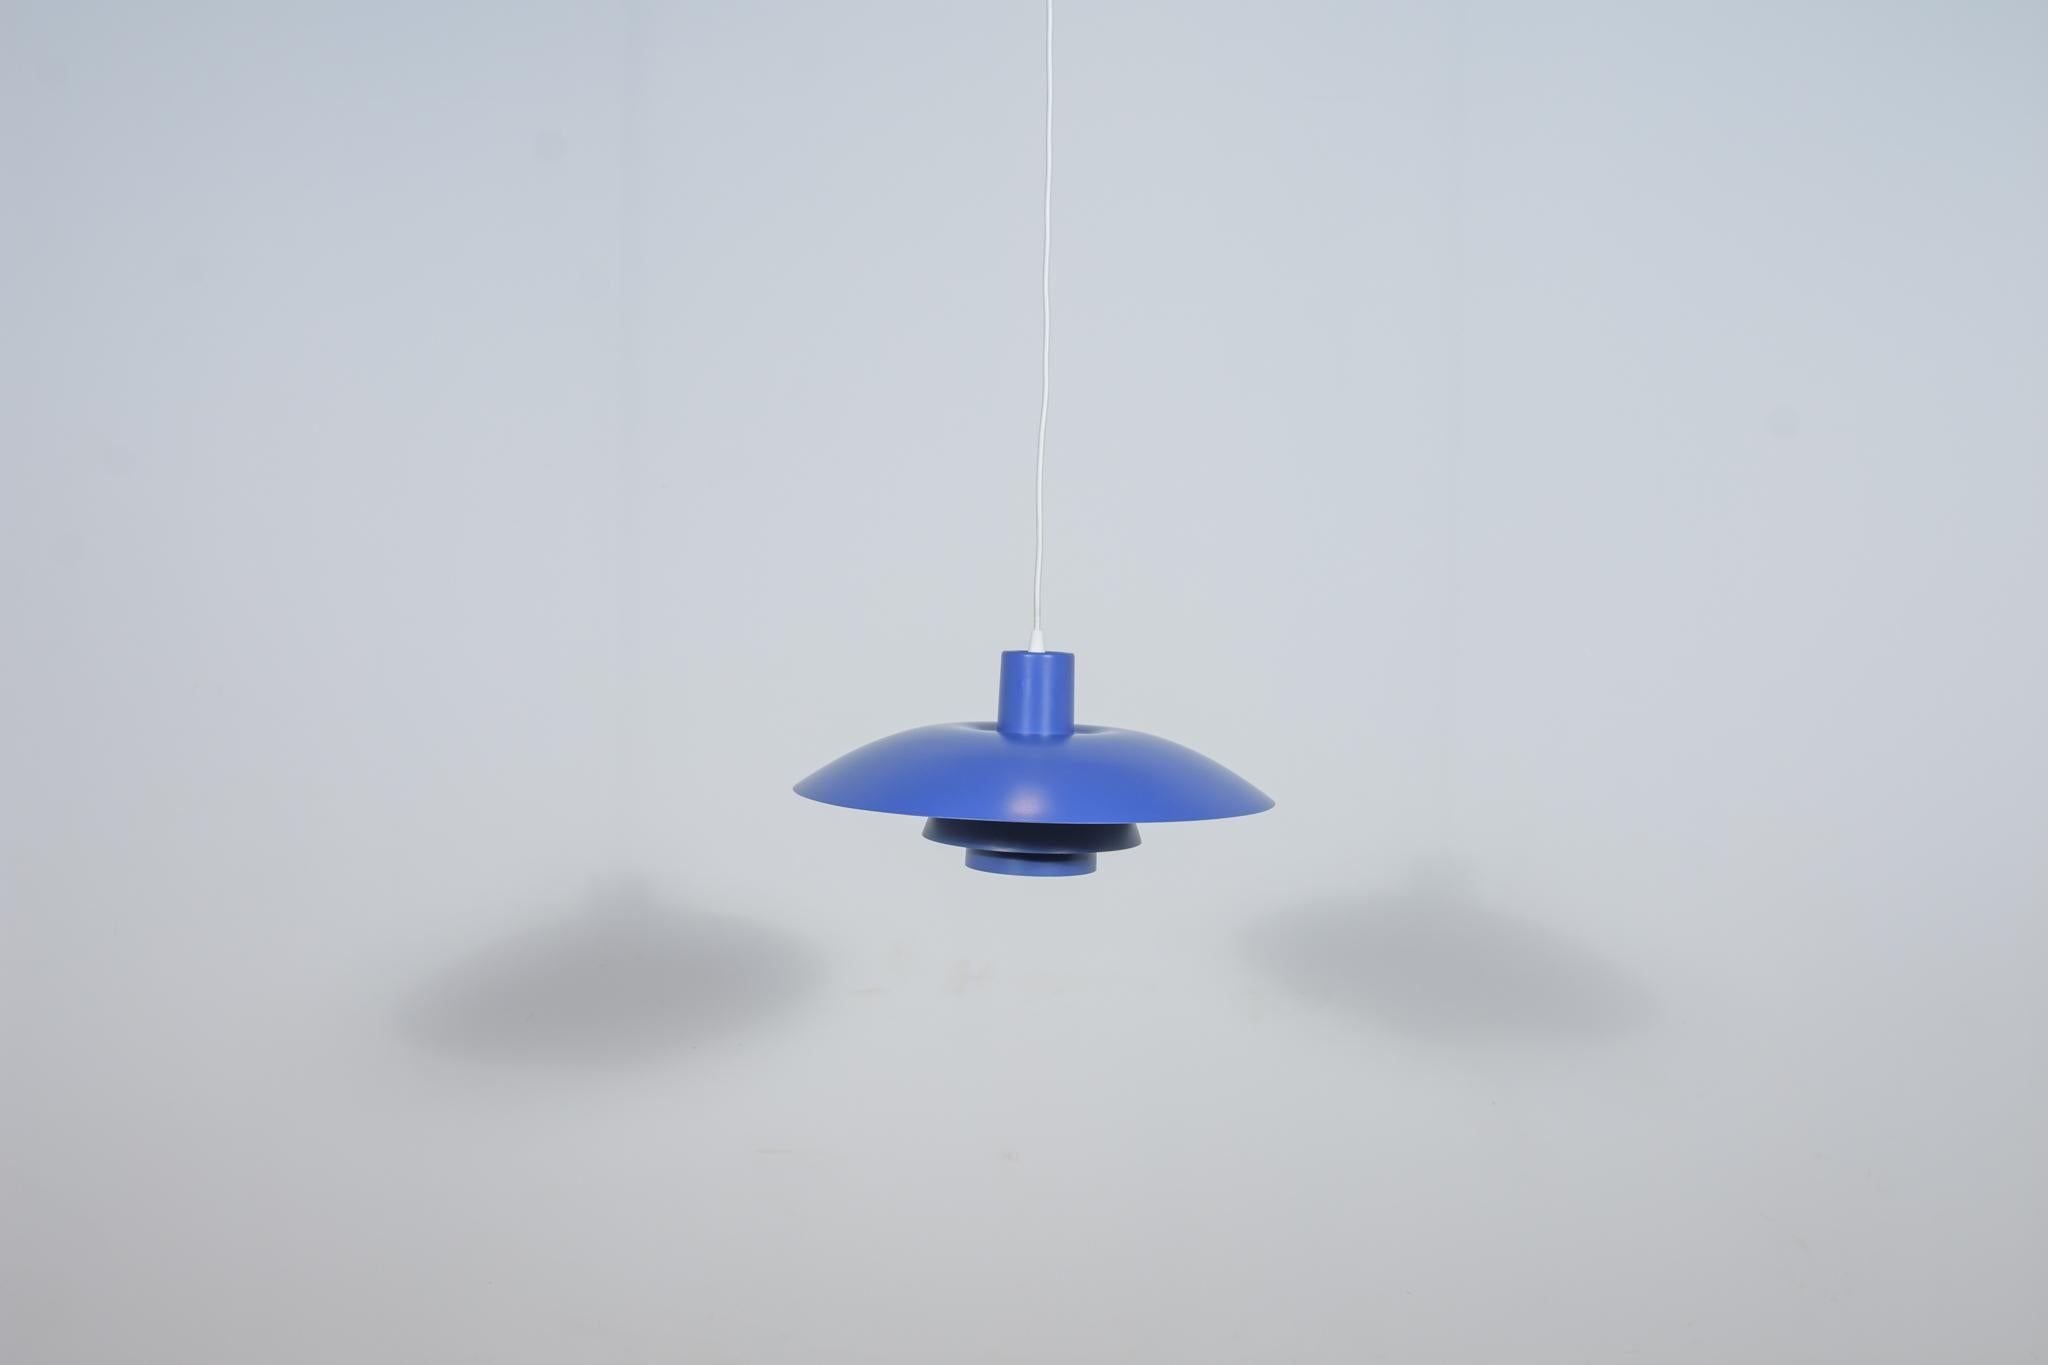 This pendant was designed by Poul Henningsen and produced by Louis Poulsen from 1966 until it was discontinued in this color in the late 1970s to early 1980s. It is made of powder-coated aluminum and is lit both downwards and from the sides. The PH